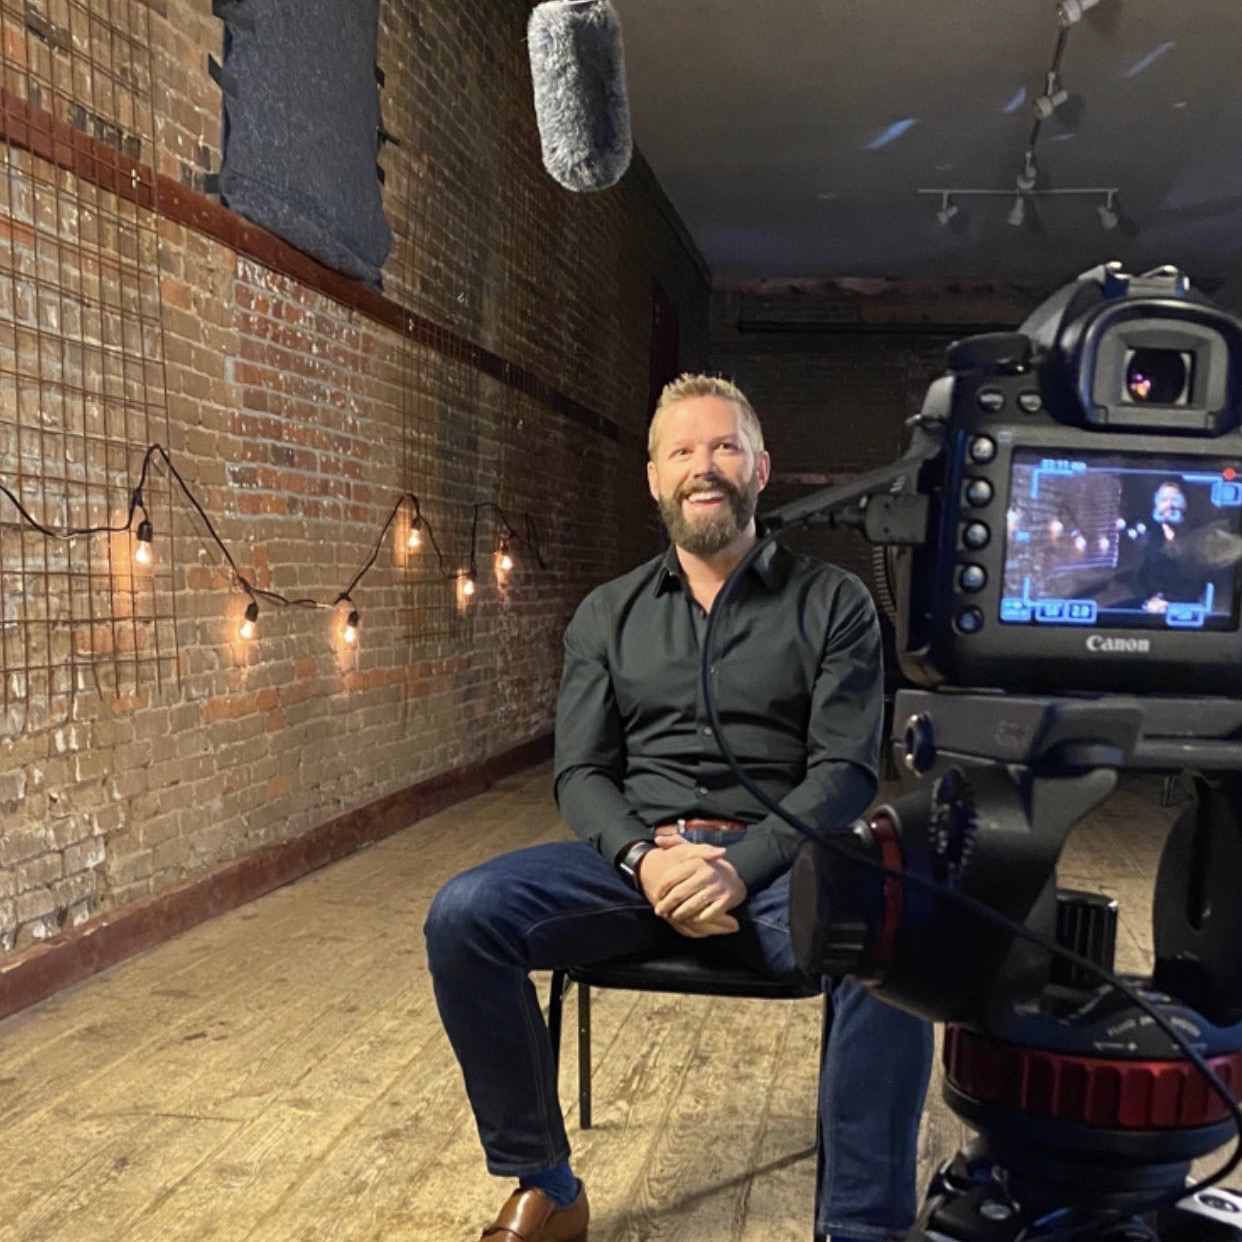 Matt Parker, CEO and CO-Founder of The Exodus Road sits in an interview setting.